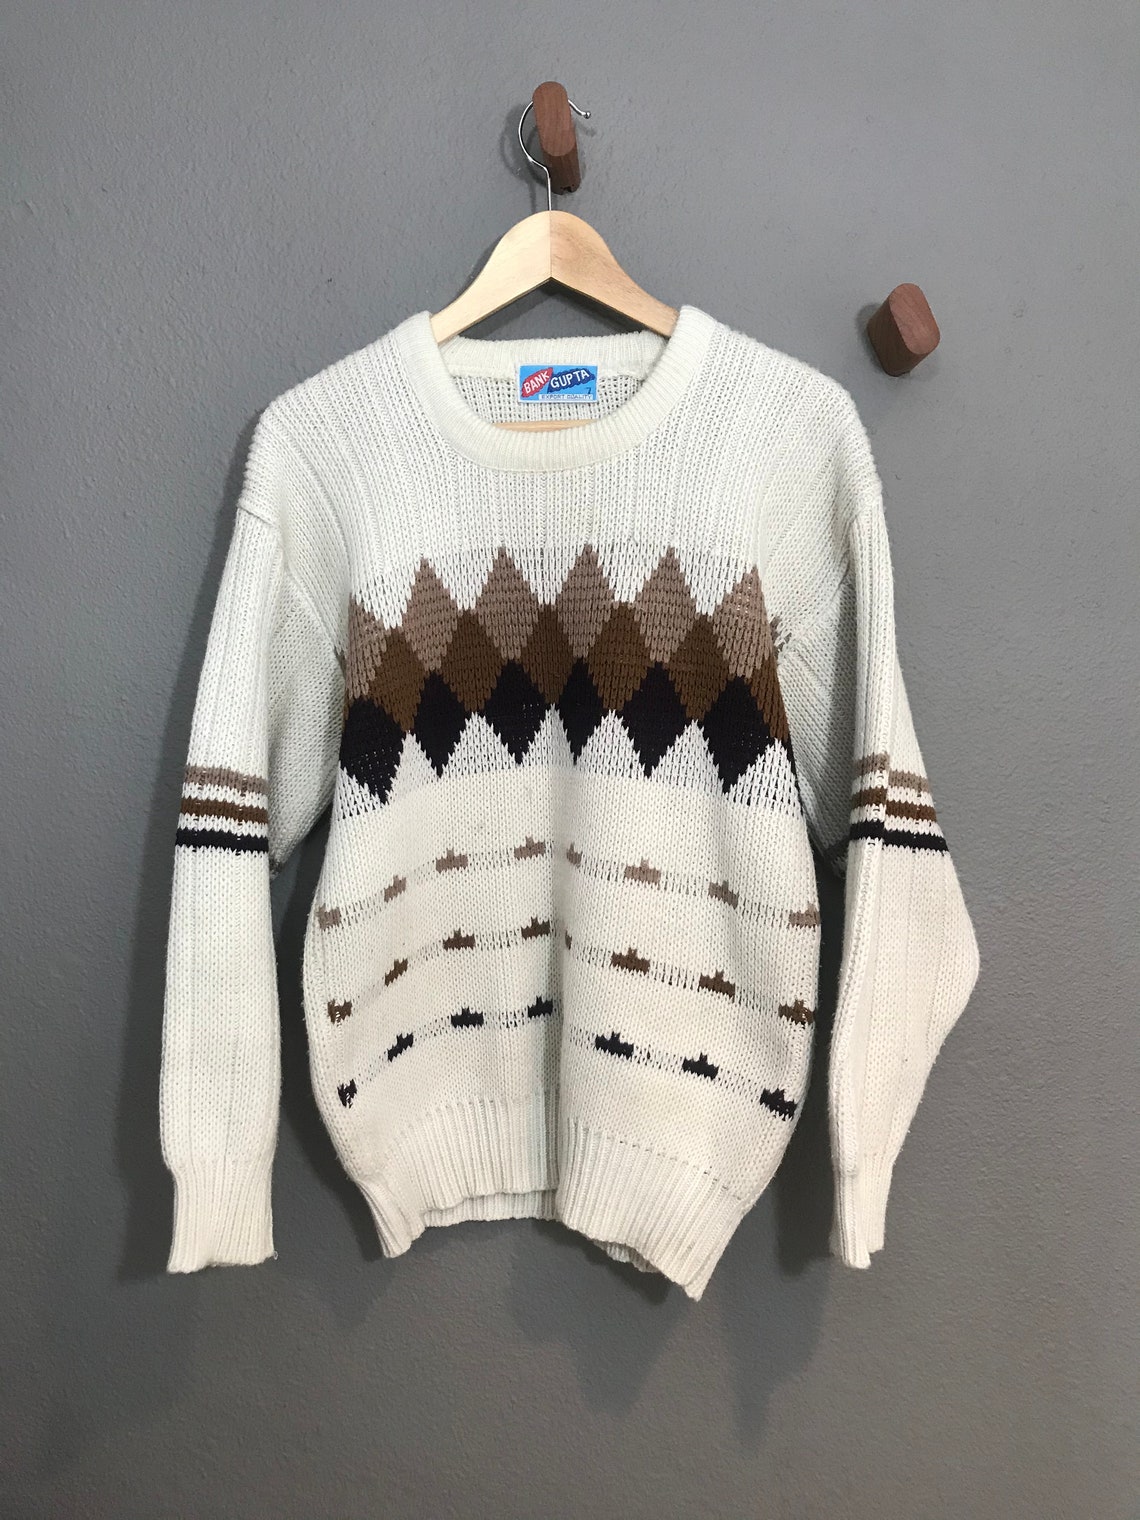 70s Knit Argyle Sweater. 1970s White and Brown Pullover | Etsy